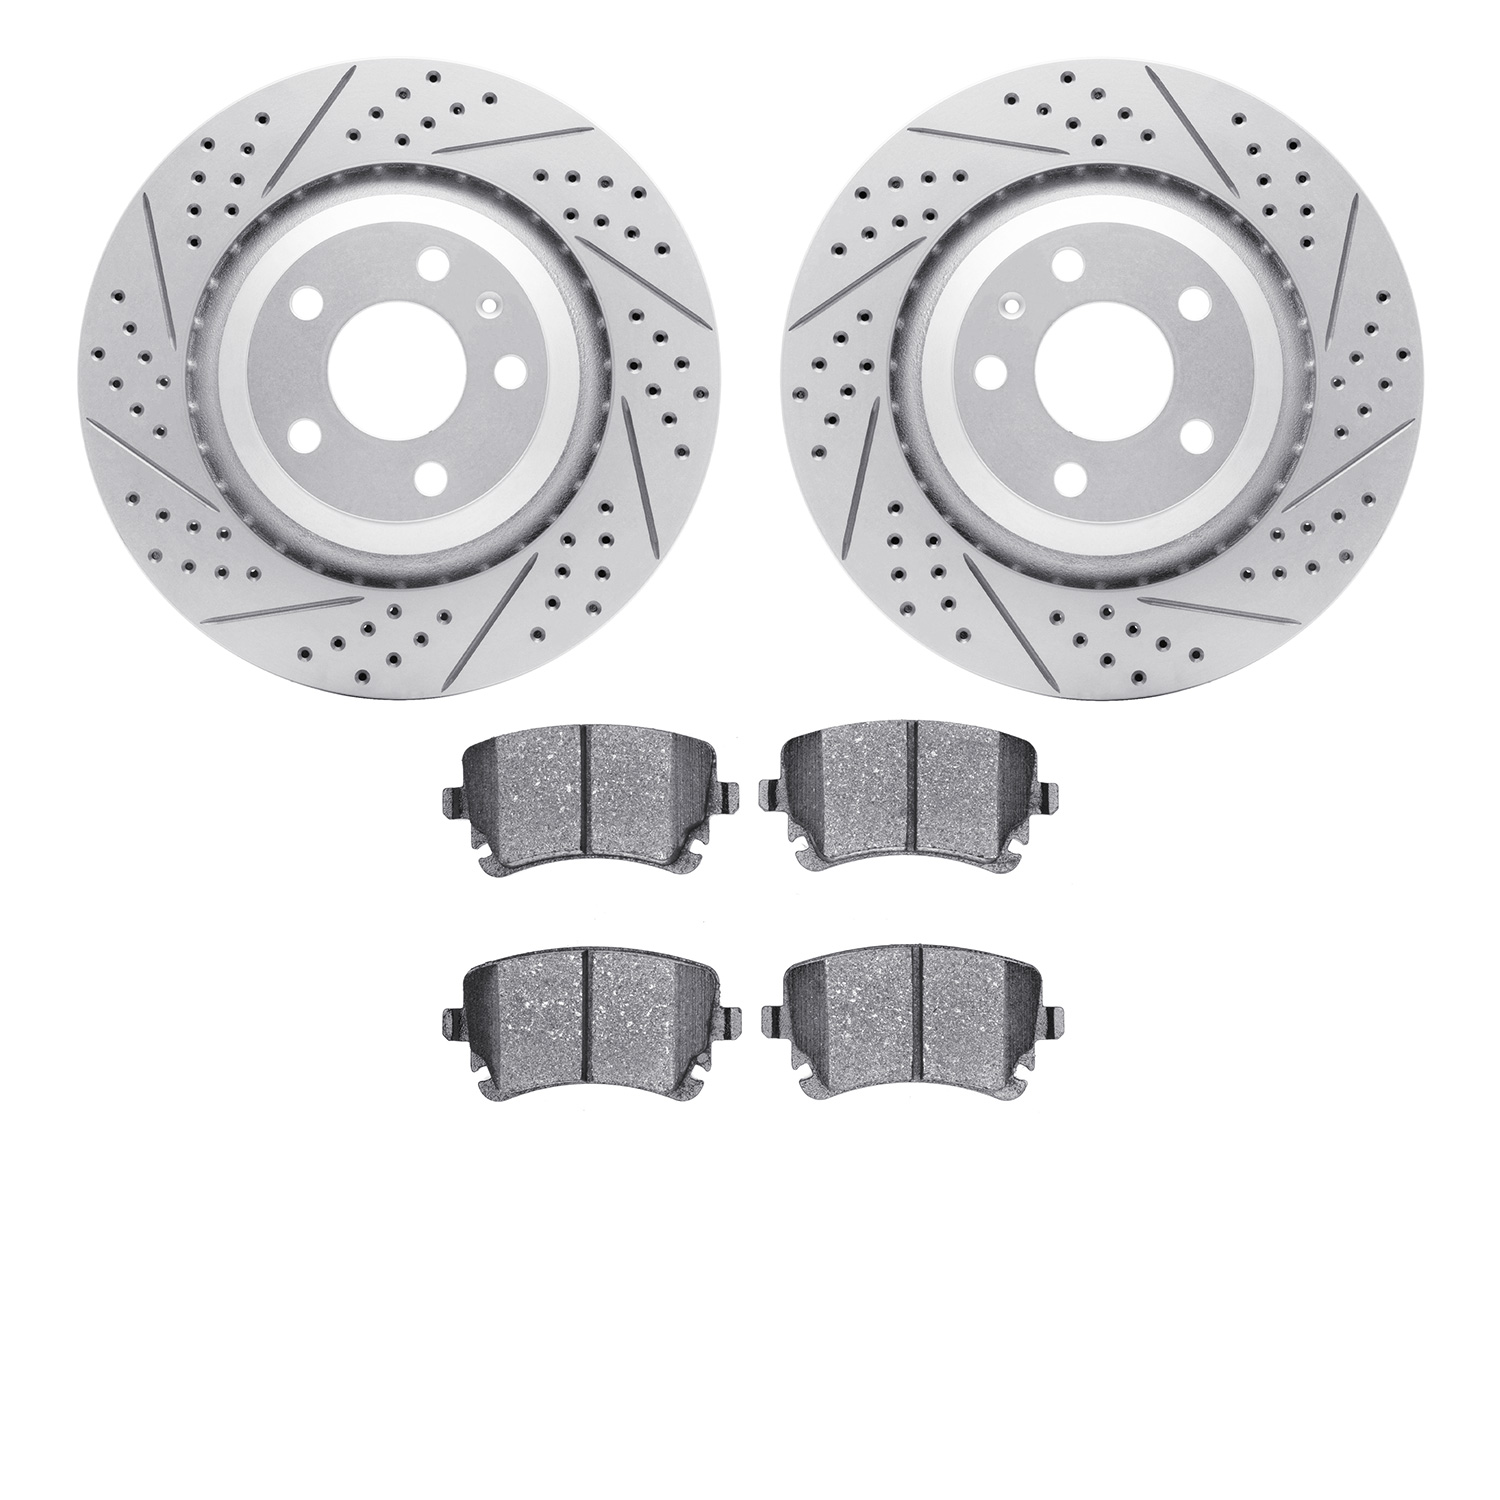 2502-73031 Geoperformance Drilled/Slotted Rotors w/5000 Advanced Brake Pads Kit, 2005-2011 Audi/Volkswagen, Position: Rear